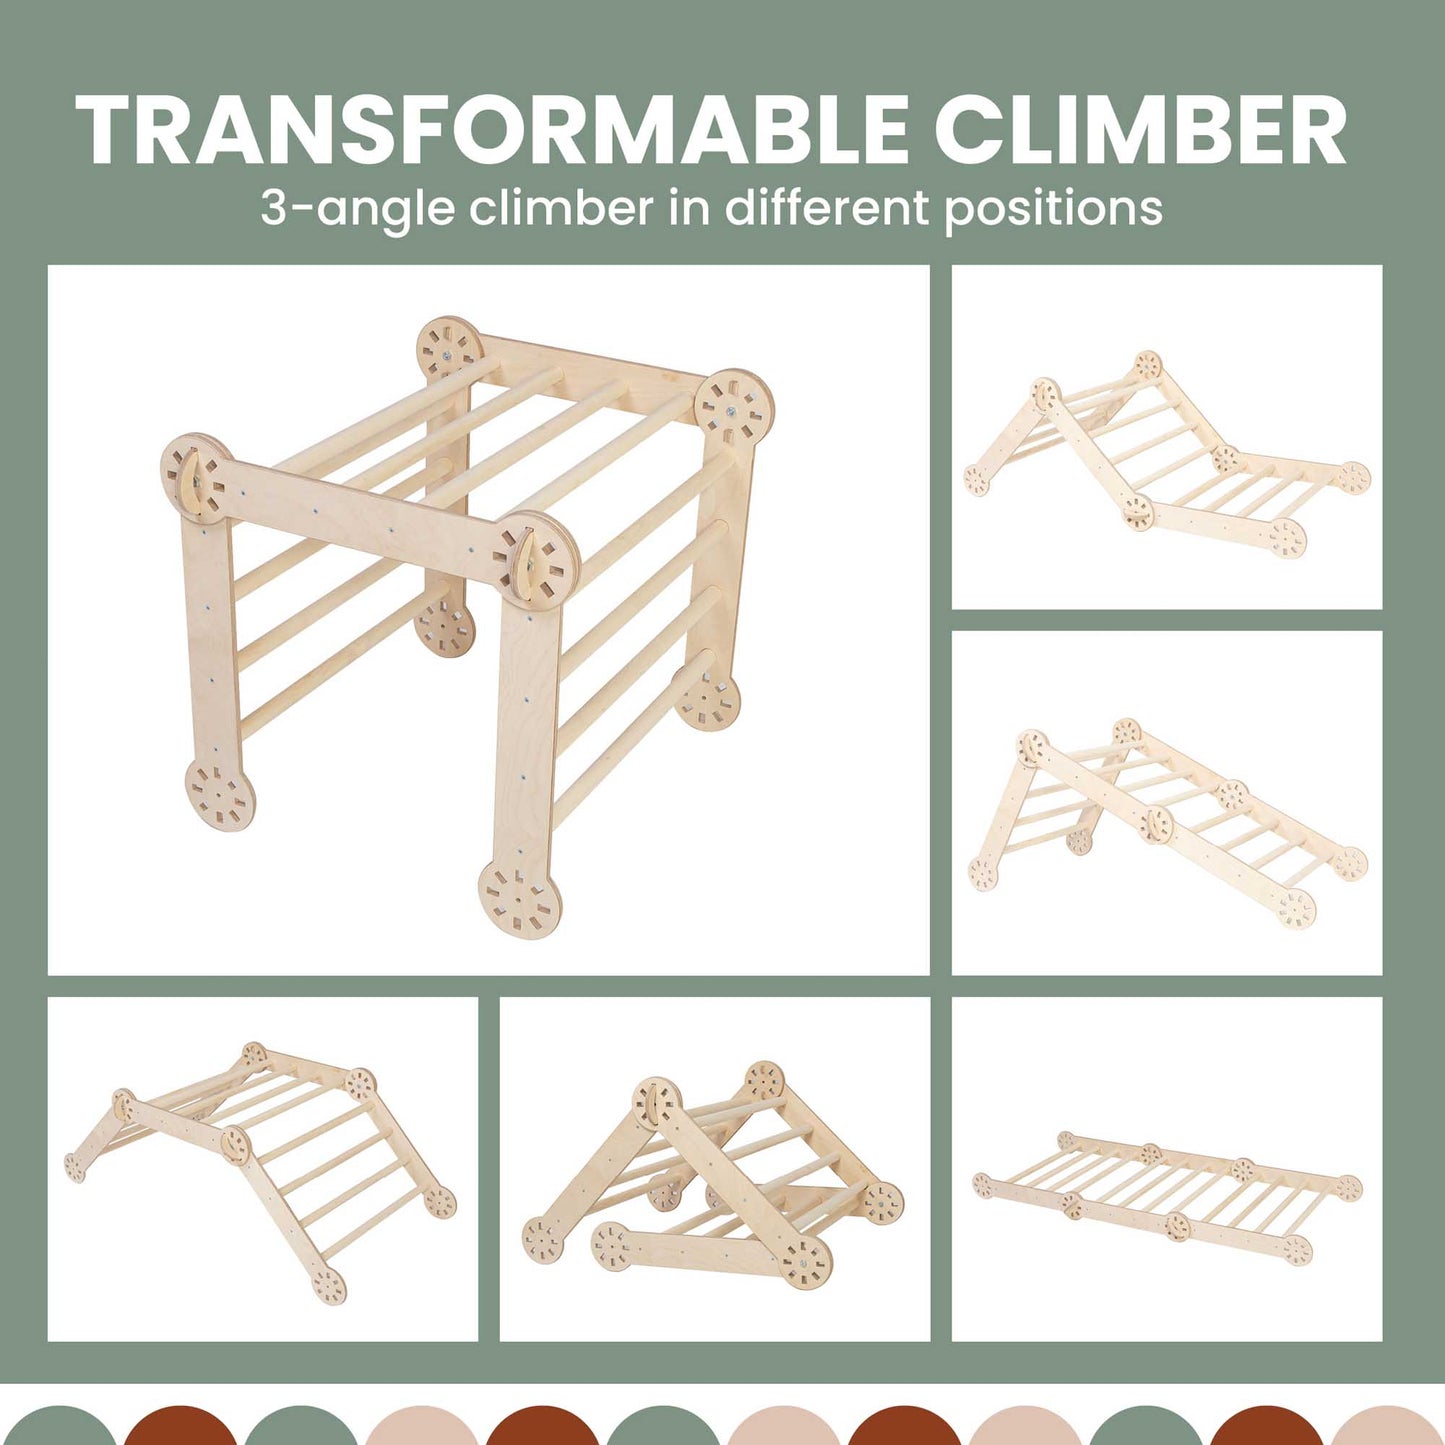 A Montessori-inspired indoor gym featuring the 2-in-1 Climbing cube/ table and chair + Transformable climber + a ramp.